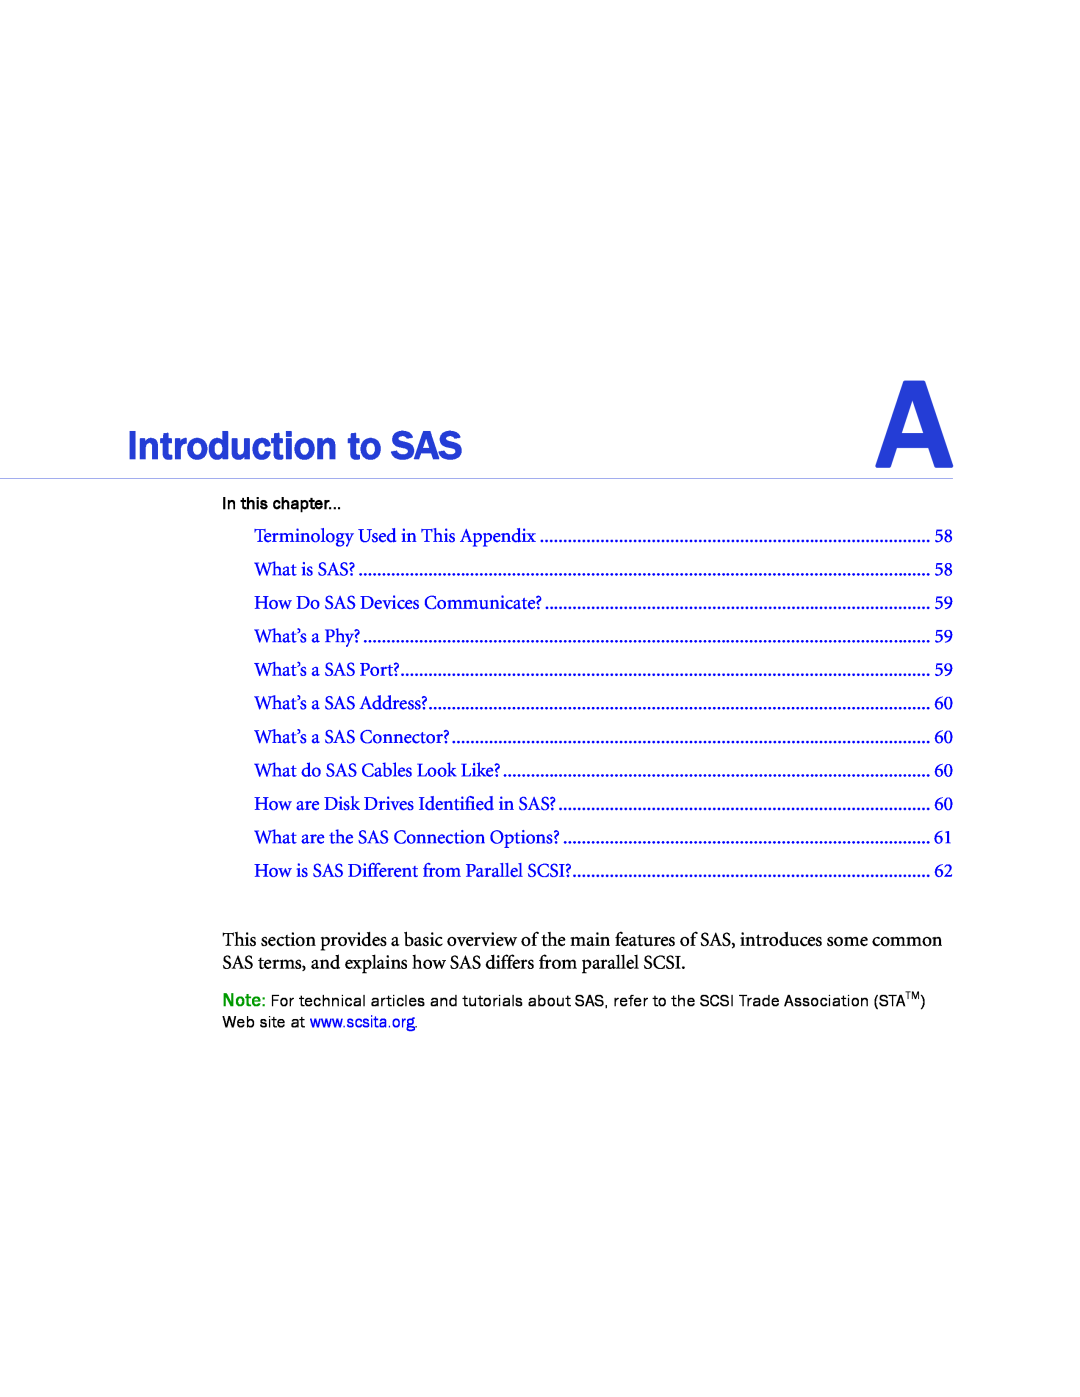 Adaptec 1420SA, 58300 Introduction to SAS, In this chapter, Terminology Used in This Appendix, What is SAS?, What’s a Phy? 